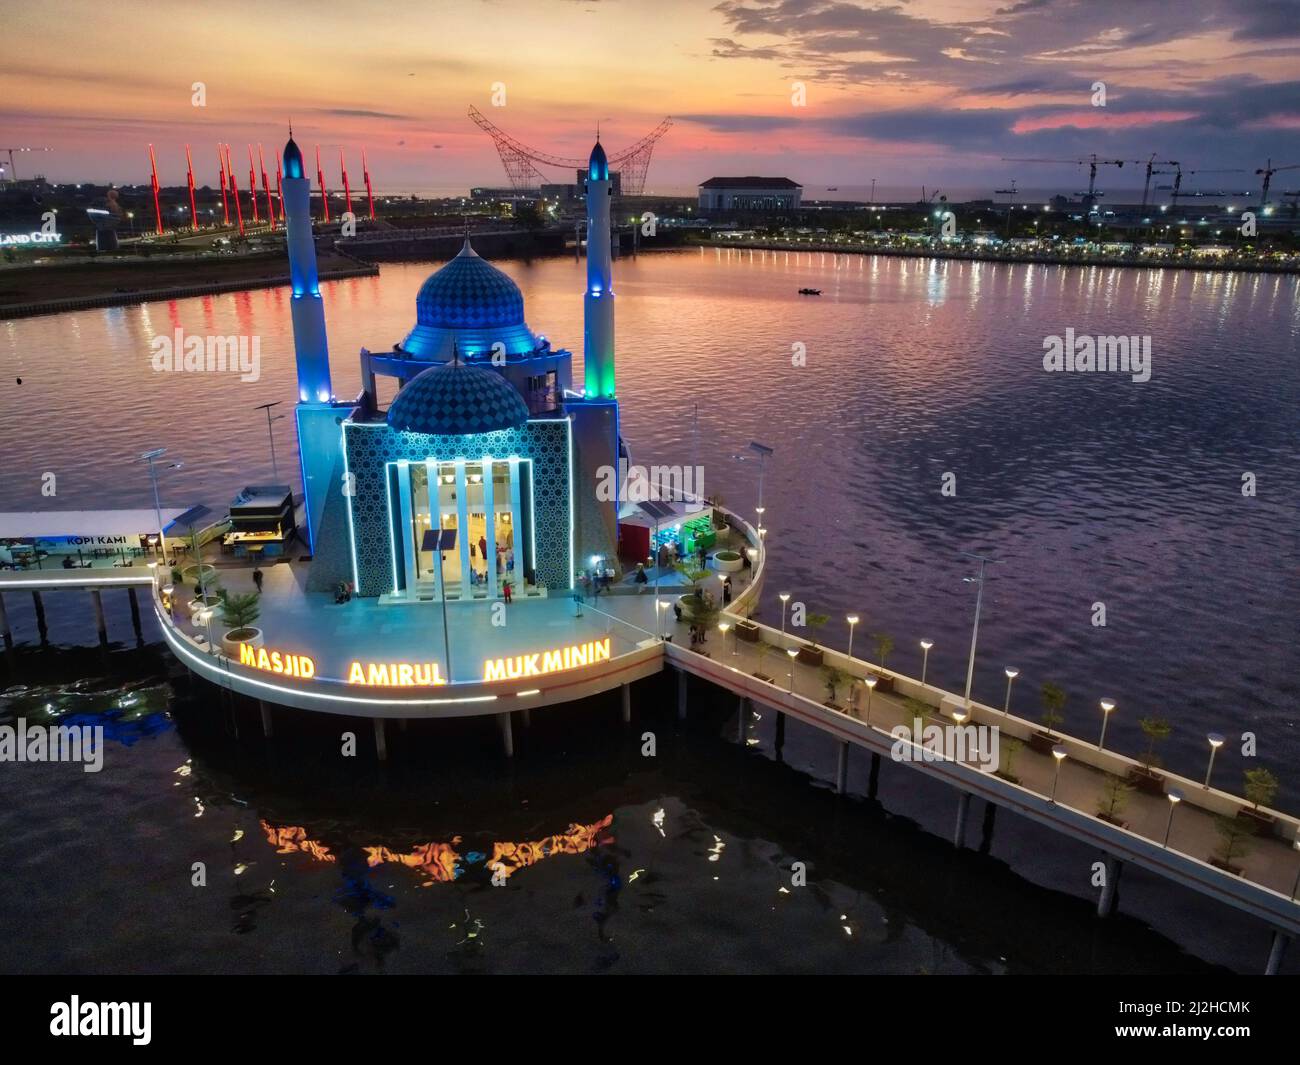 Being called the Amirul Mukminin Mosque, this mosque was built with the concept of a floating mosque. The Amirul Mukminin Mosque is built on a pile of Stock Photo